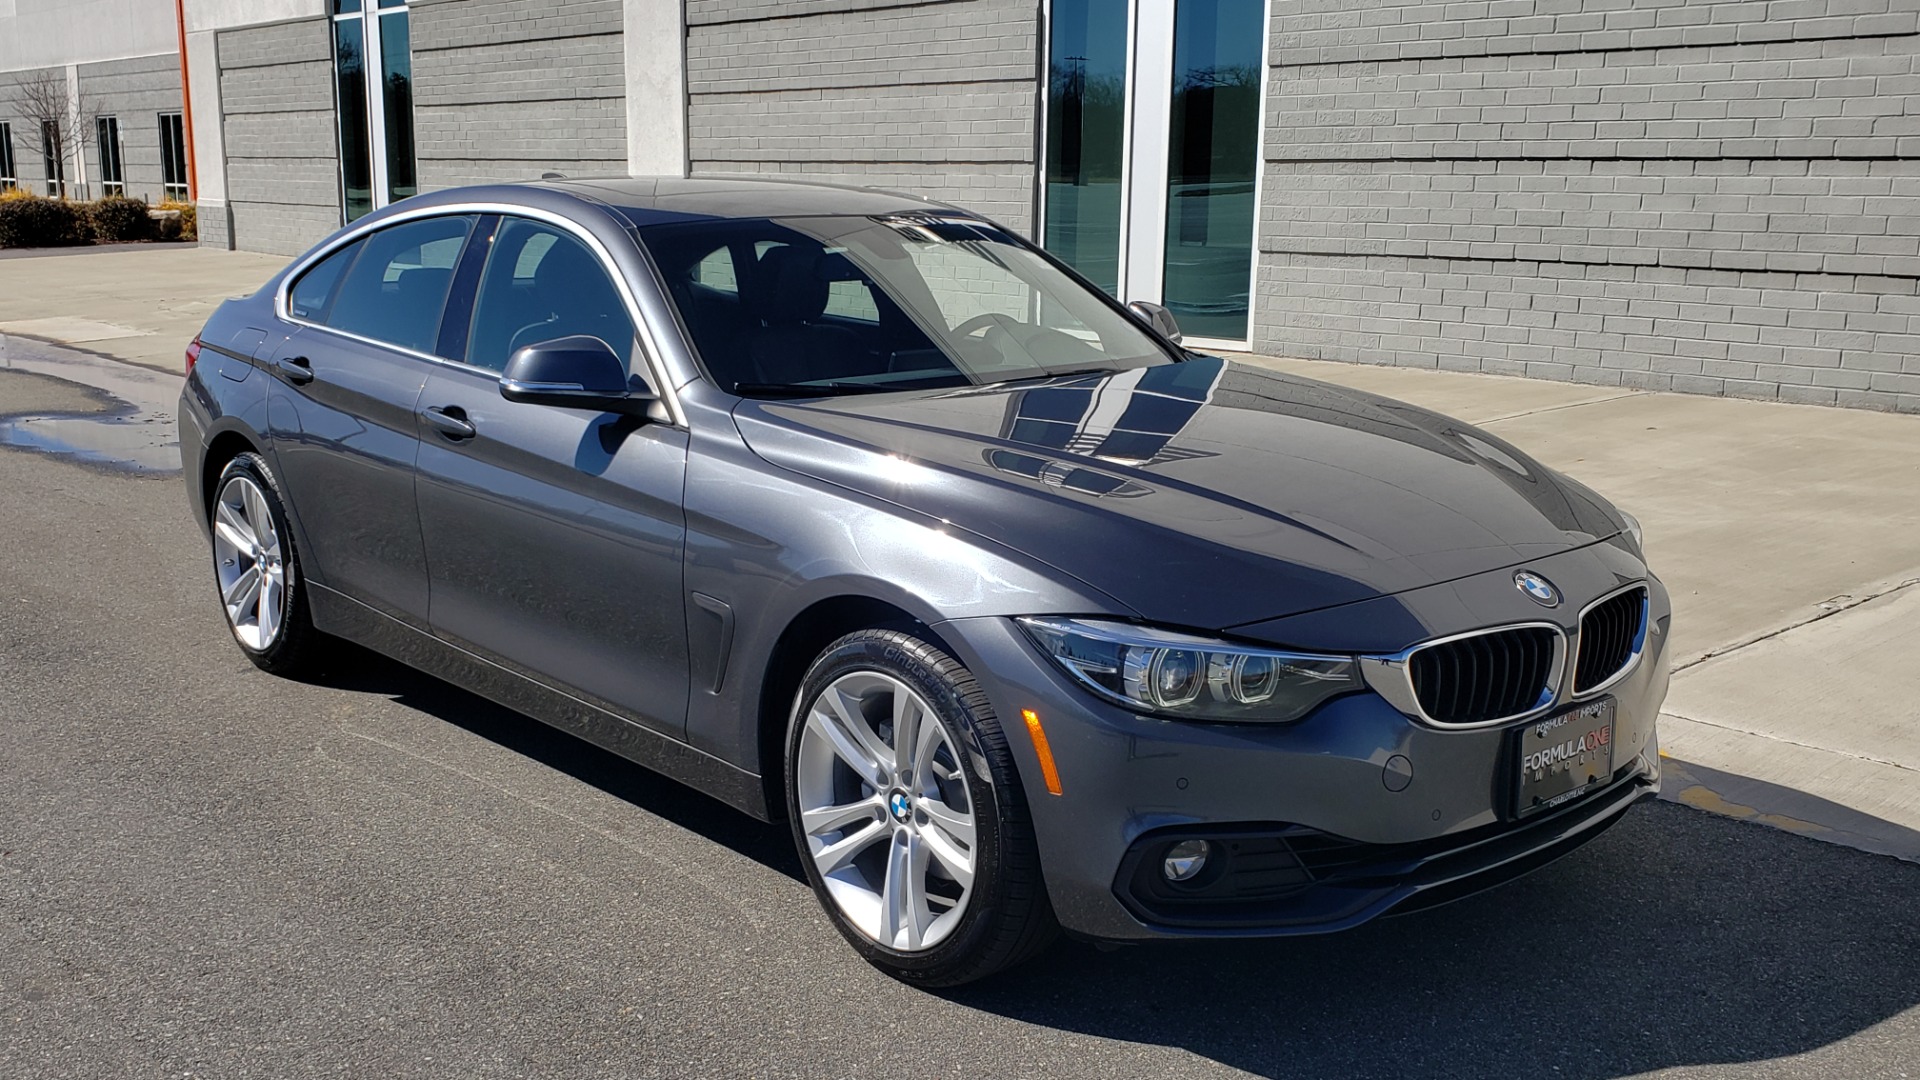 Used 2018 BMW 4 SERIES 430IXDRIVE / PREMIUM / NAV / SUNROOF / ESSENTIALS PKG for sale Sold at Formula Imports in Charlotte NC 28227 10